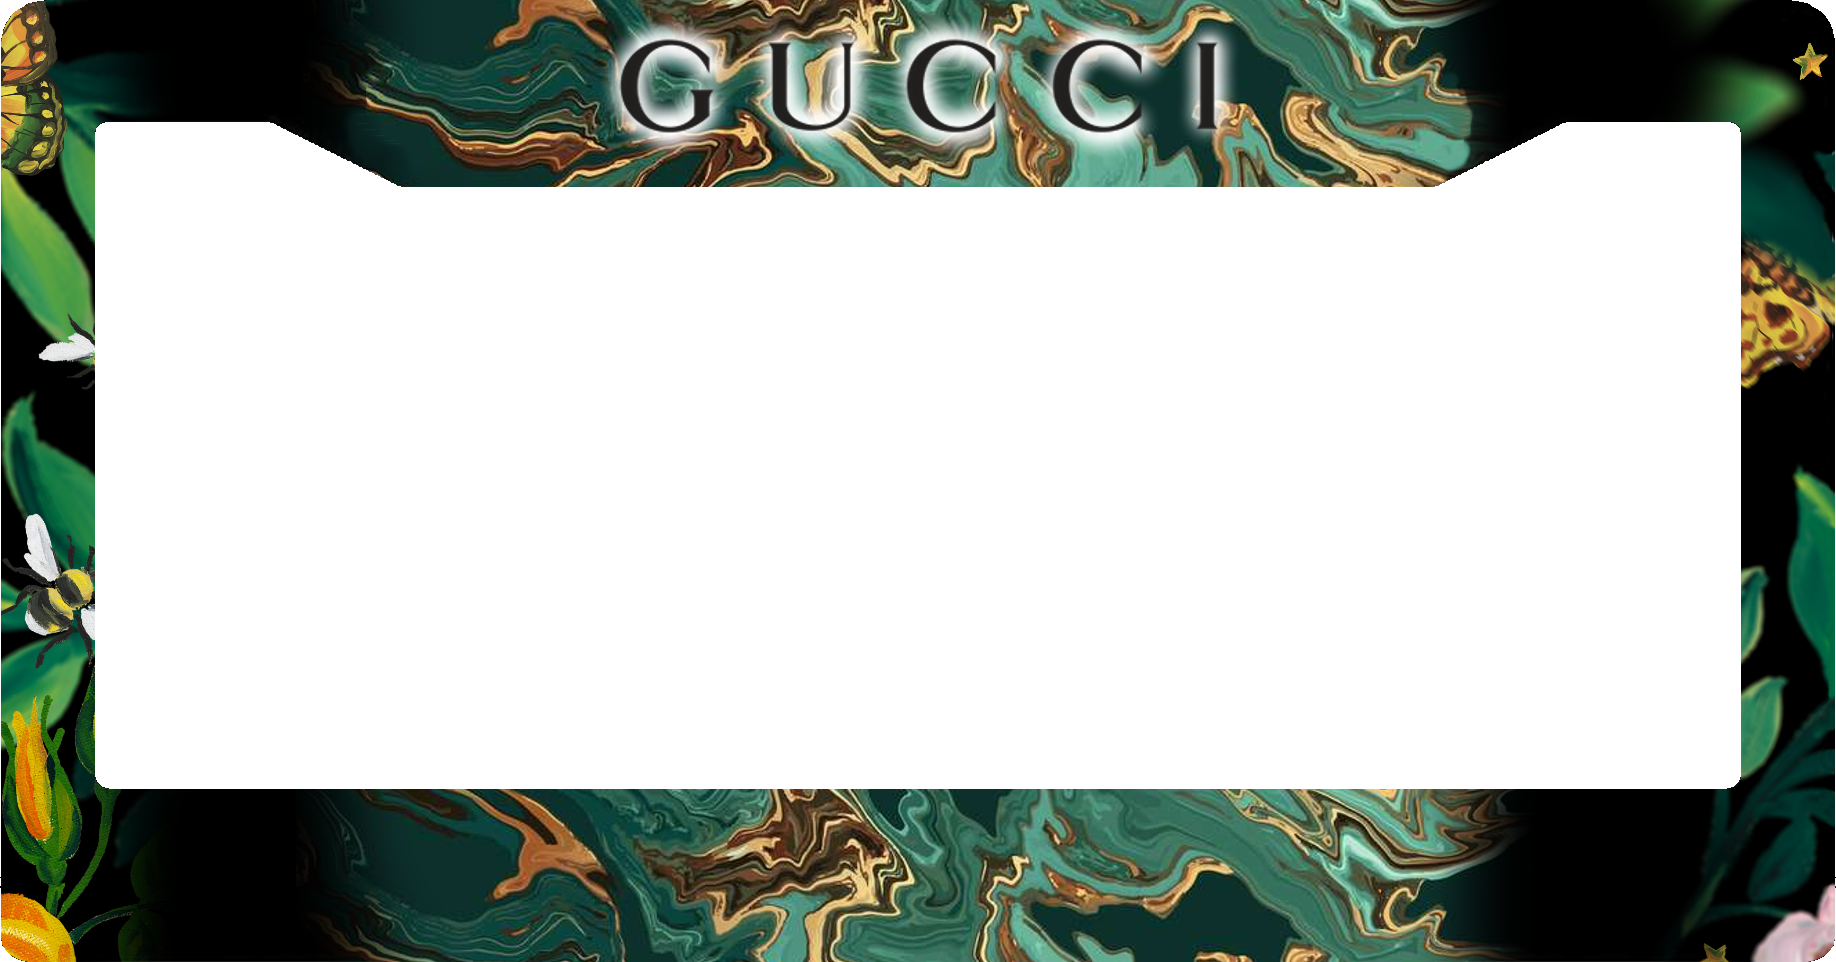 Gucci License Plate Frame Luxury – hueplate